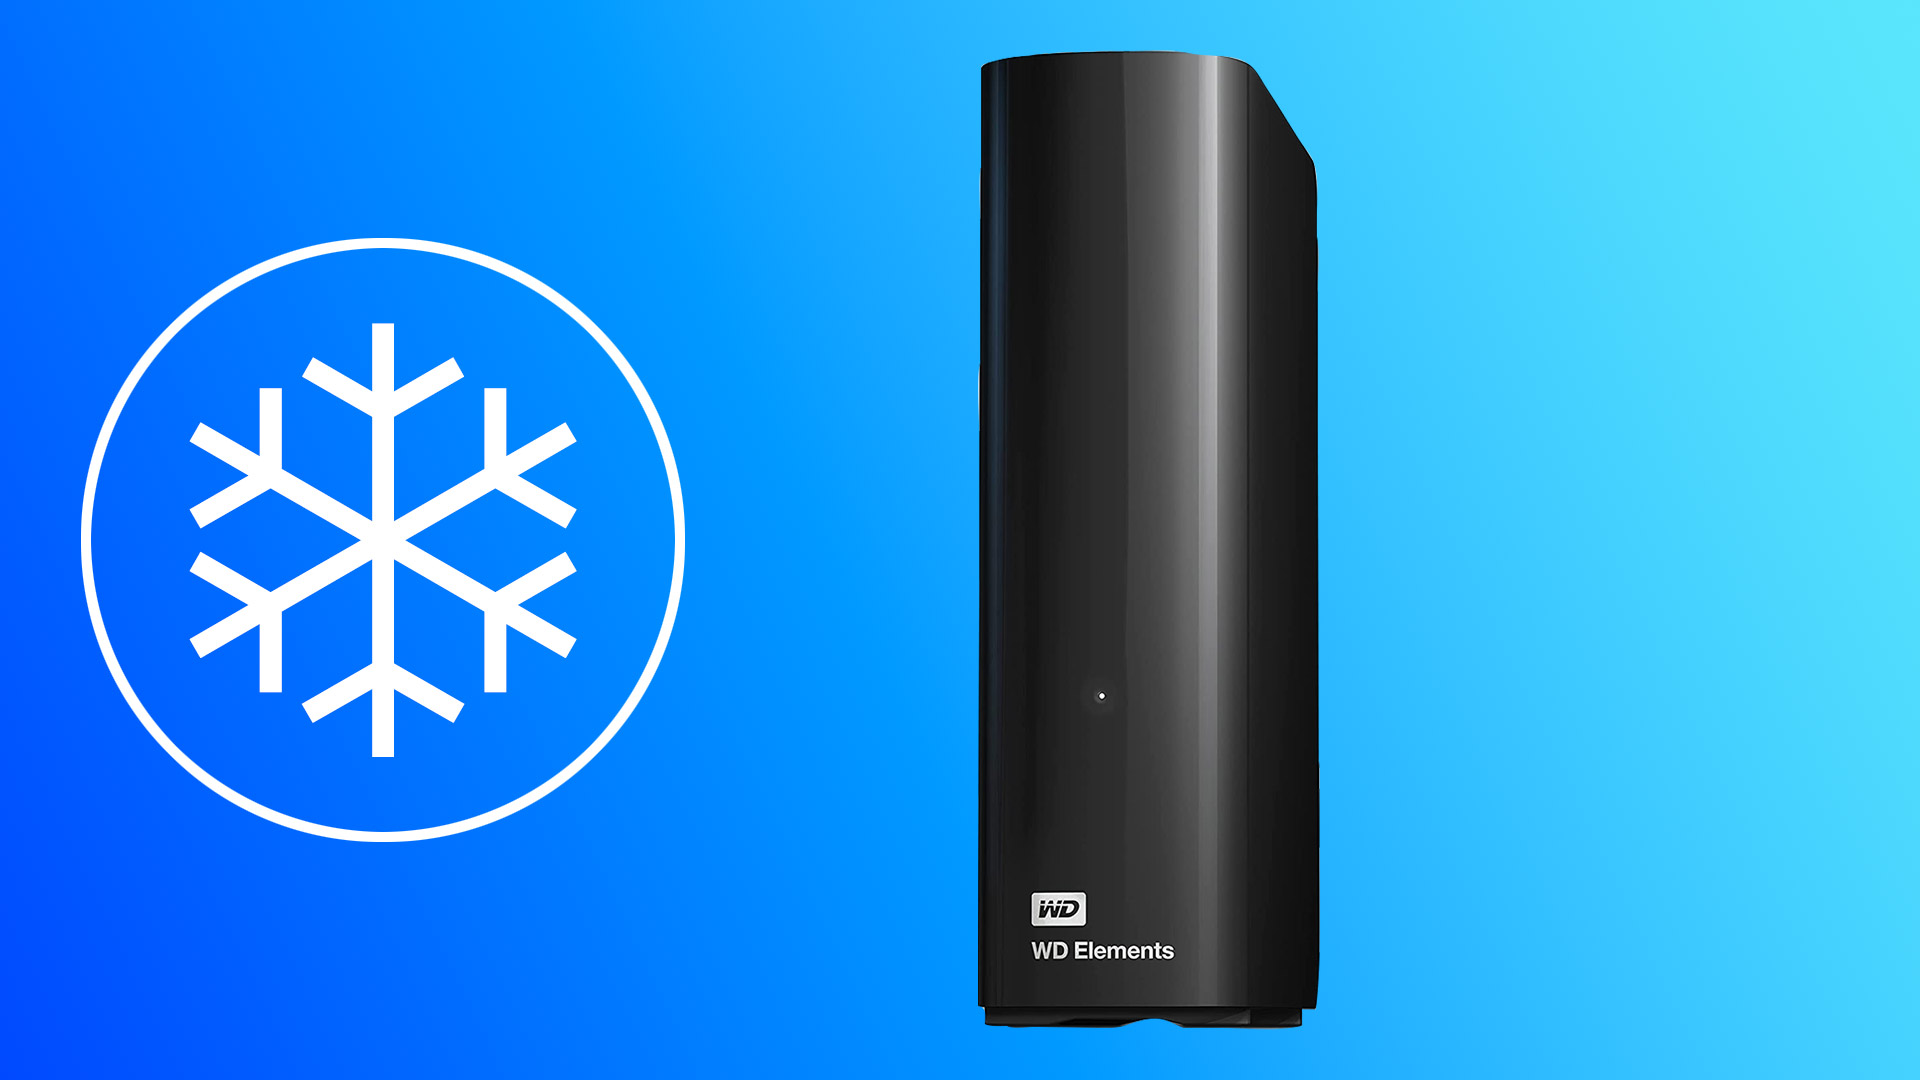 A WD Elements 20TB hard drive on a blue background with an image of a snowflake next to it